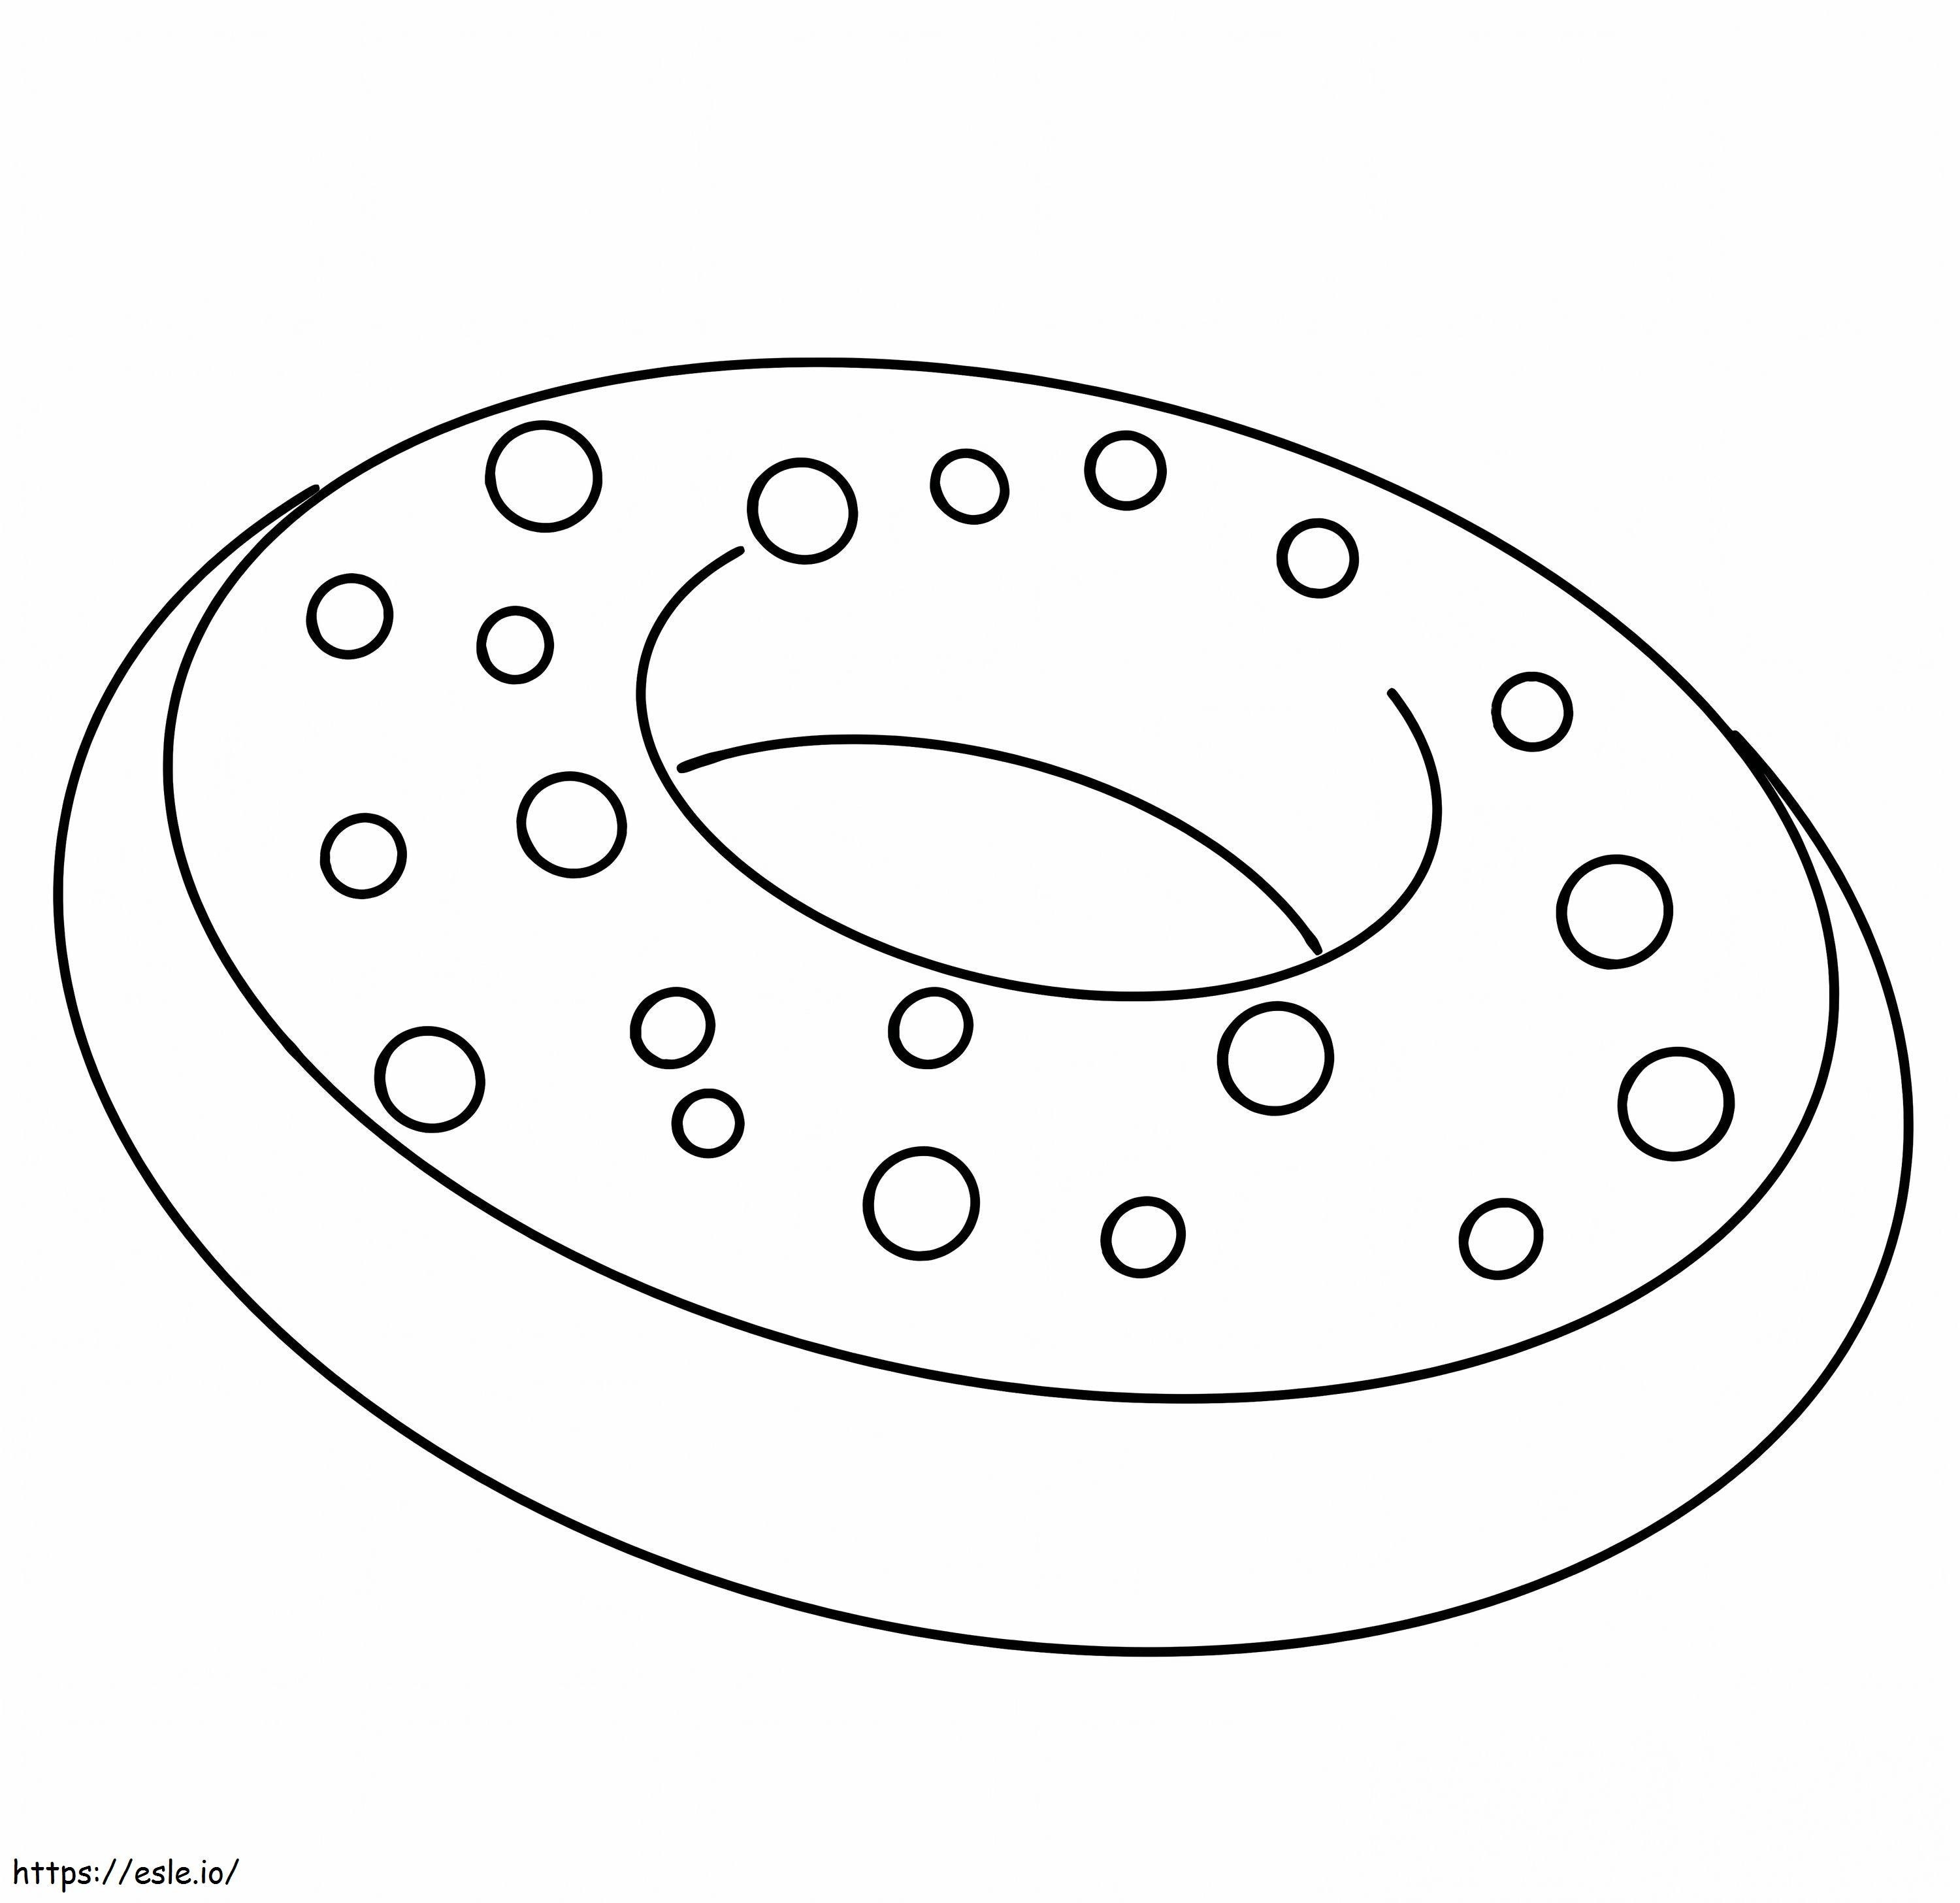 Good Donut coloring page